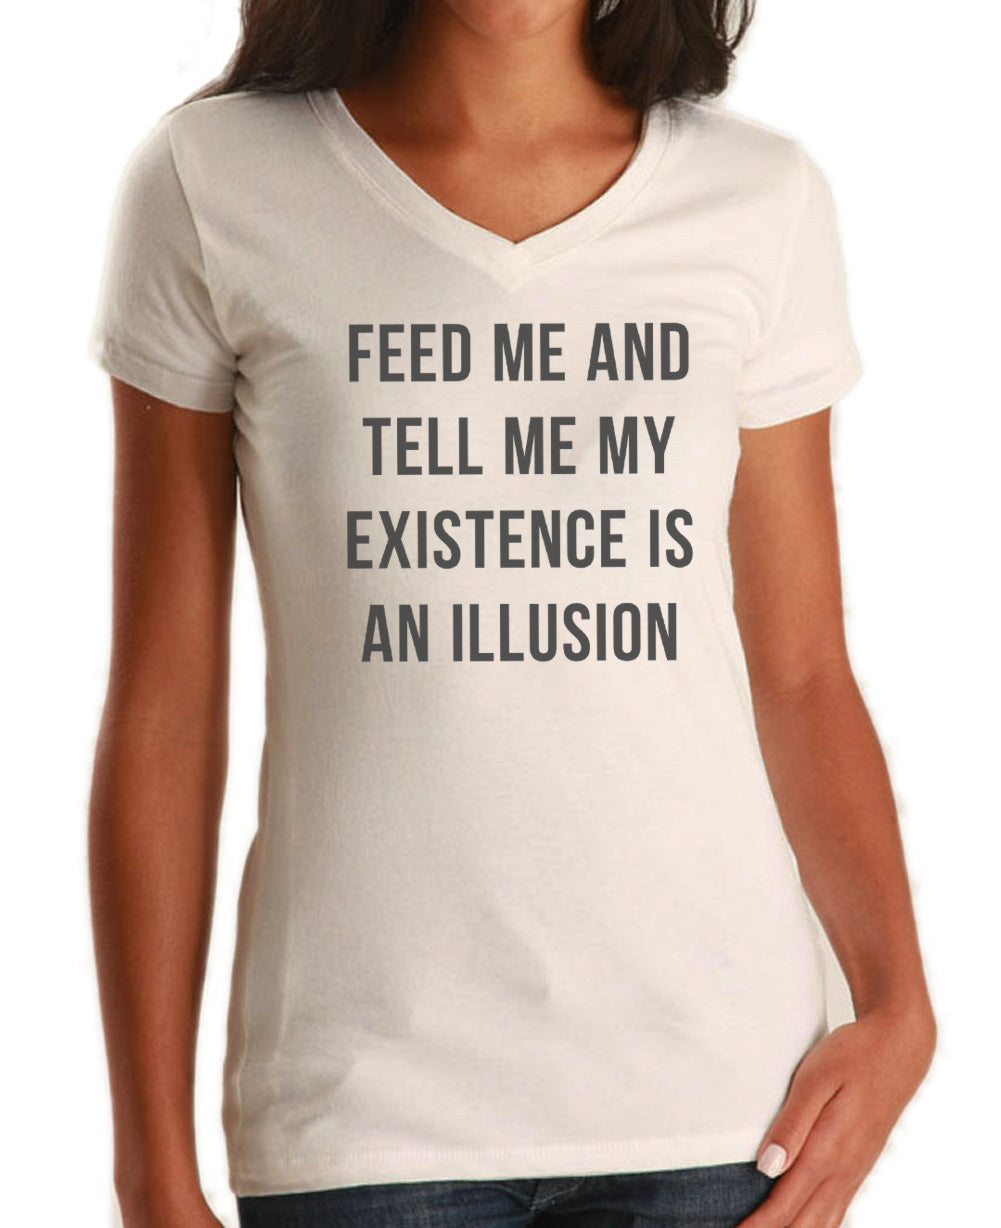 Women's Feed Me and Tell Me My Existence is an Illusion Vneck T-Shirt - Existentialism Shirt